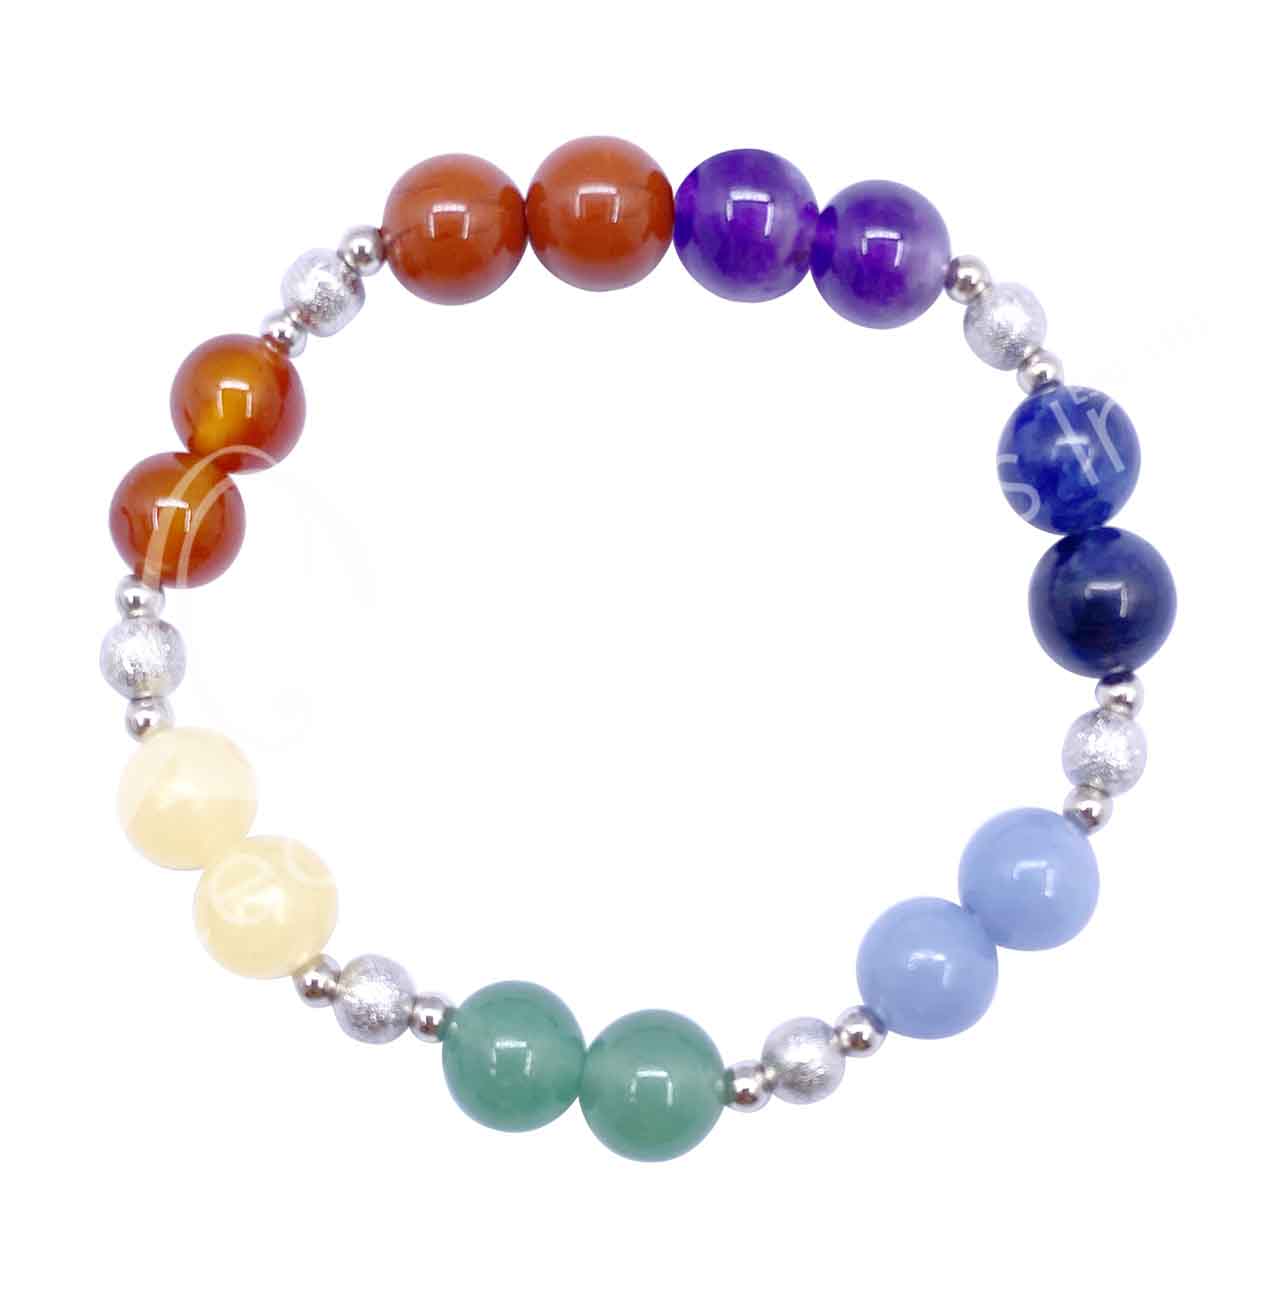 7 Chakra Bracelet Healing Crystal Stone Bead Cuff Bracelets Adjustable 14k  Gold Plated Bracelets $2.8 - Wholesale China Girls' Cuff Bracelets at  factory prices from Ouyi Technology Co., Ltd. | Globalsources.com